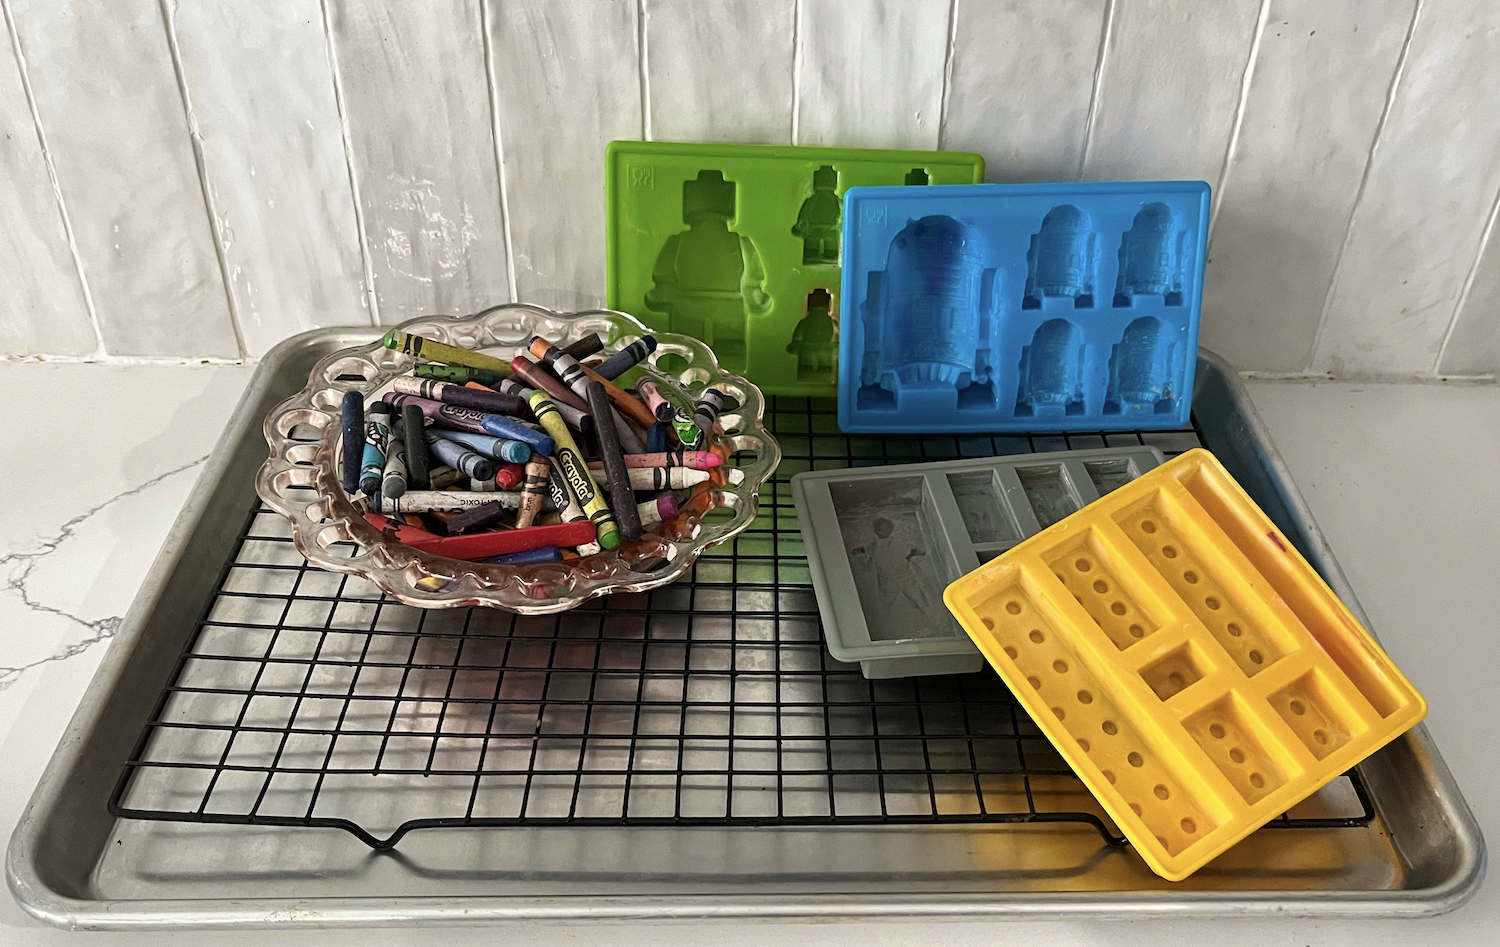 crayon melting supplies on a kitchen countertop: crayons, molds, baking sheet, wire rack